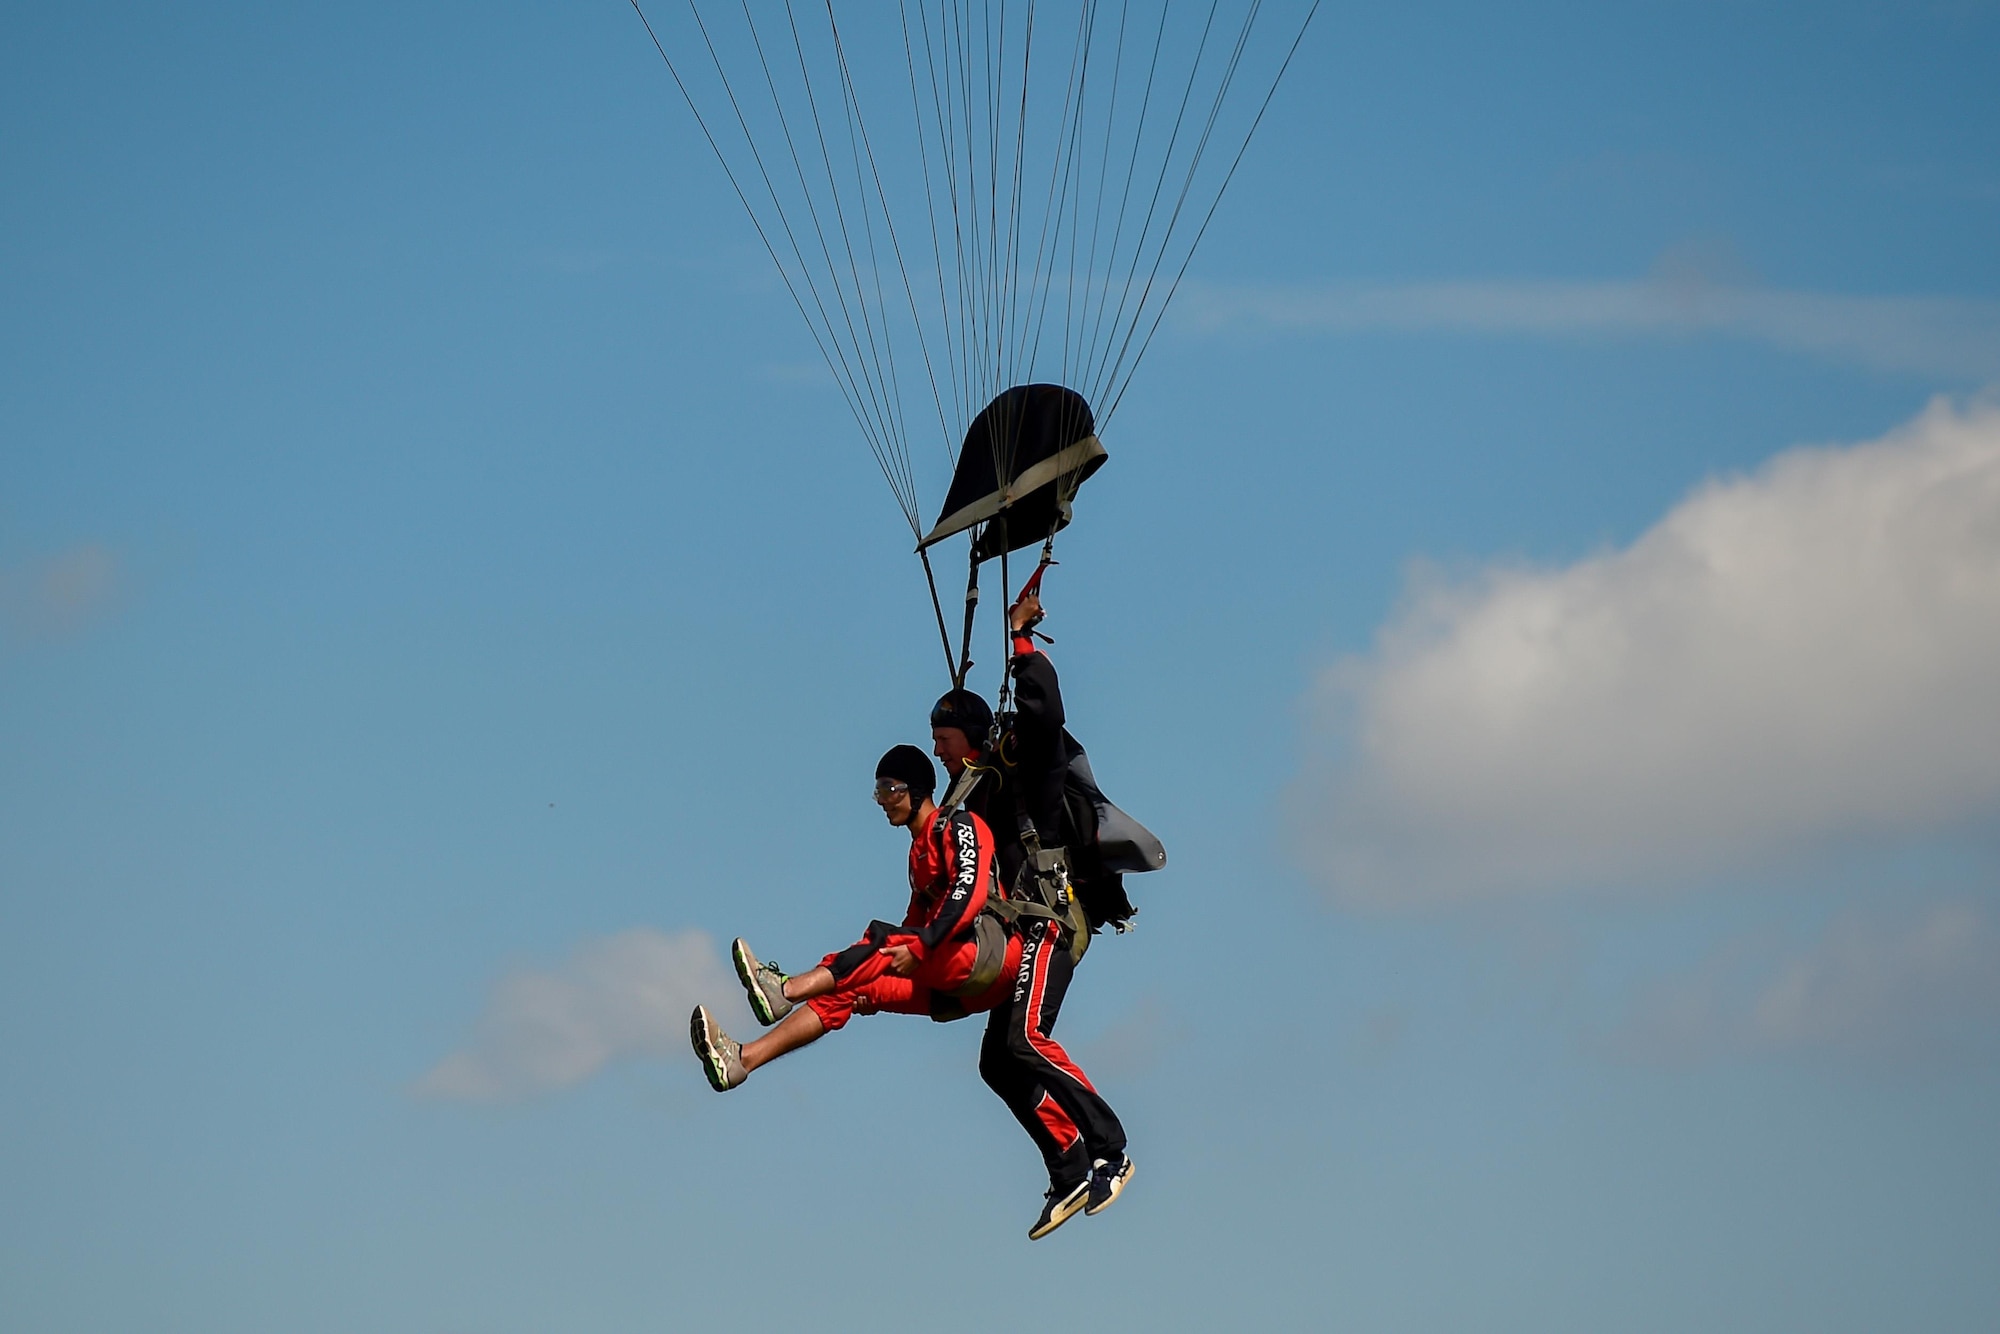 Airman 1st Class Demitrius Como, 24th Intelligence Squadron geospatial analyst, prepares for a landing after a tandem-skydiving jump over Wallerfangen, Germany, Aug. 13, 2016. The purpose of the trip was to improve the spiritual fitness of the Airmen by allowing them to take a leap of faith. (U.S. Air Force photo/Senior Airman Nicole Keim)